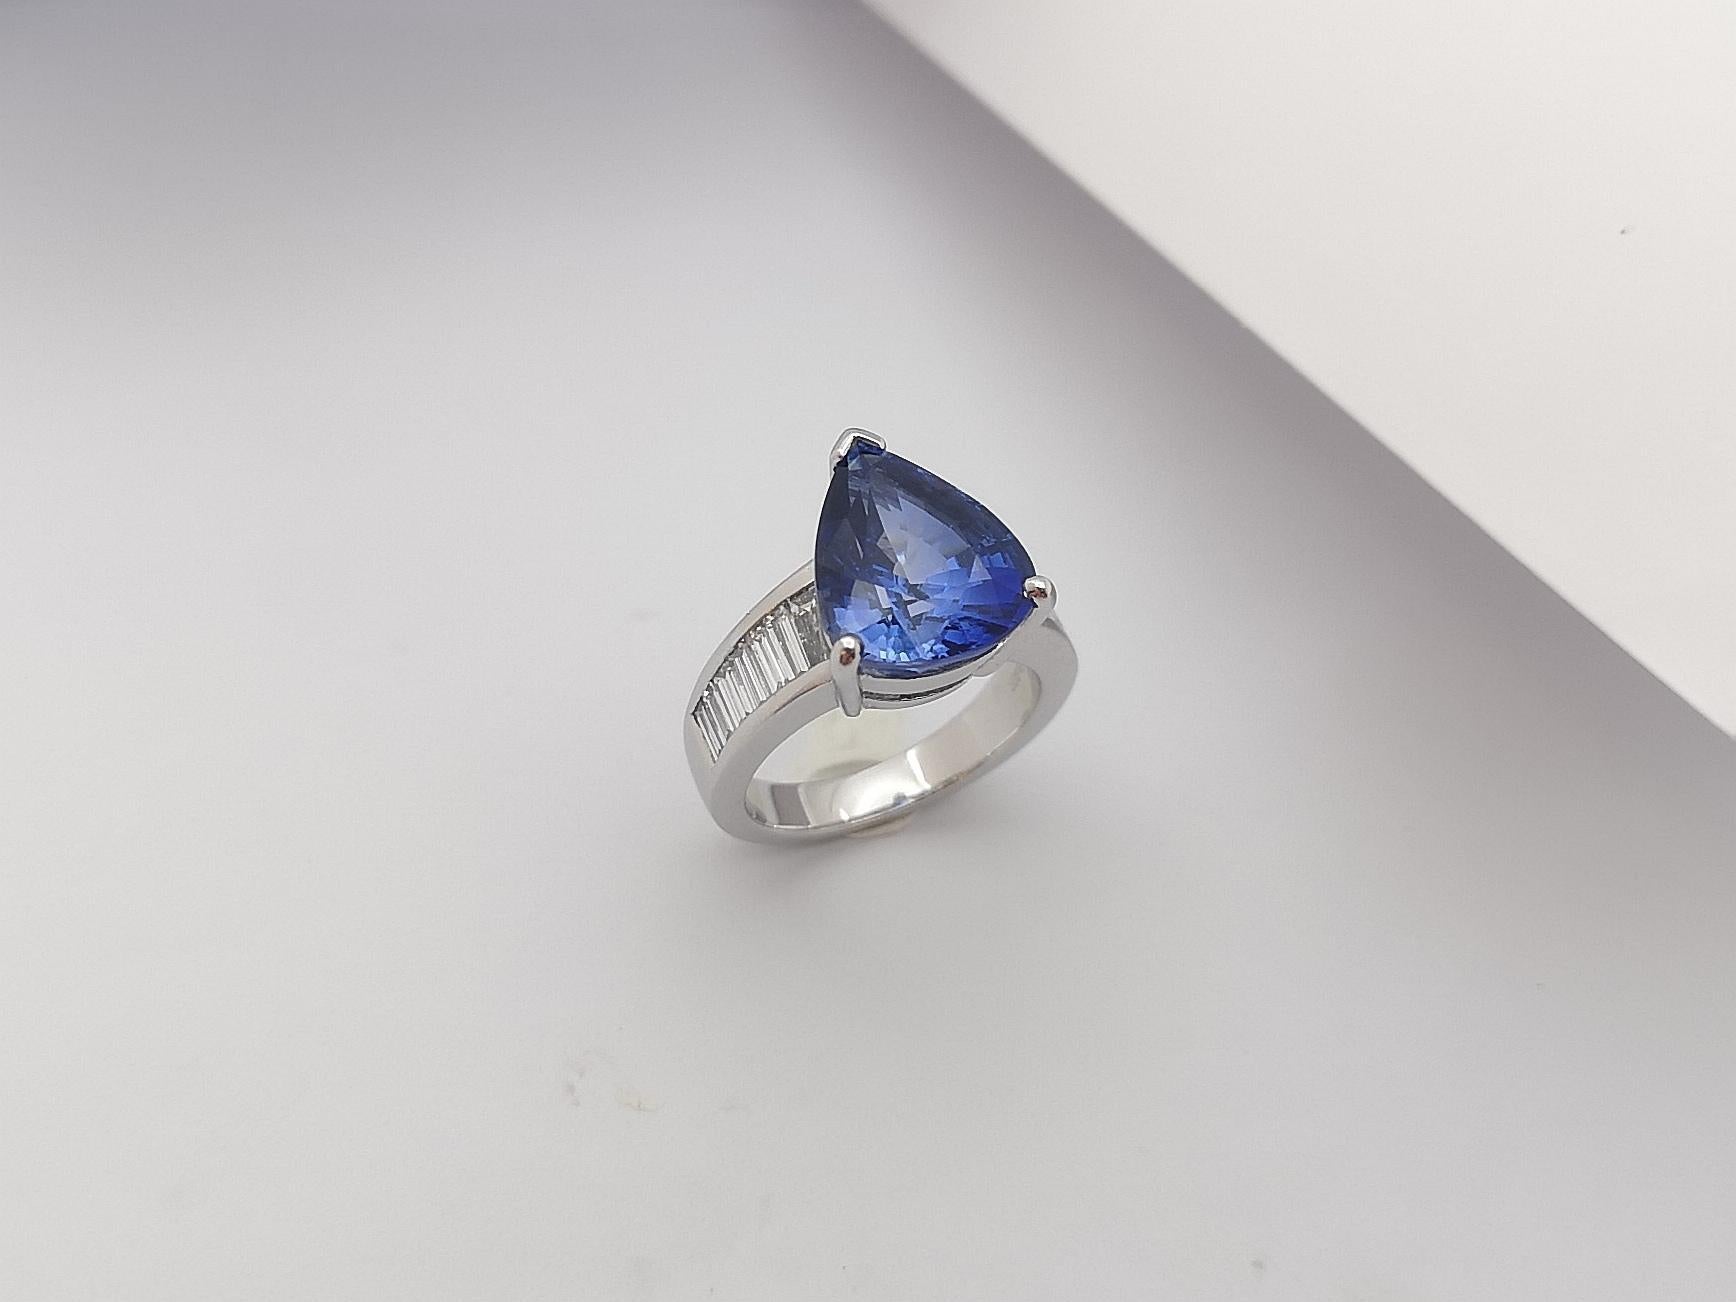 GIA Certified 7cts Ceylon Blue Sapphire with Diamond Ring Set in Platinum For Sale 6